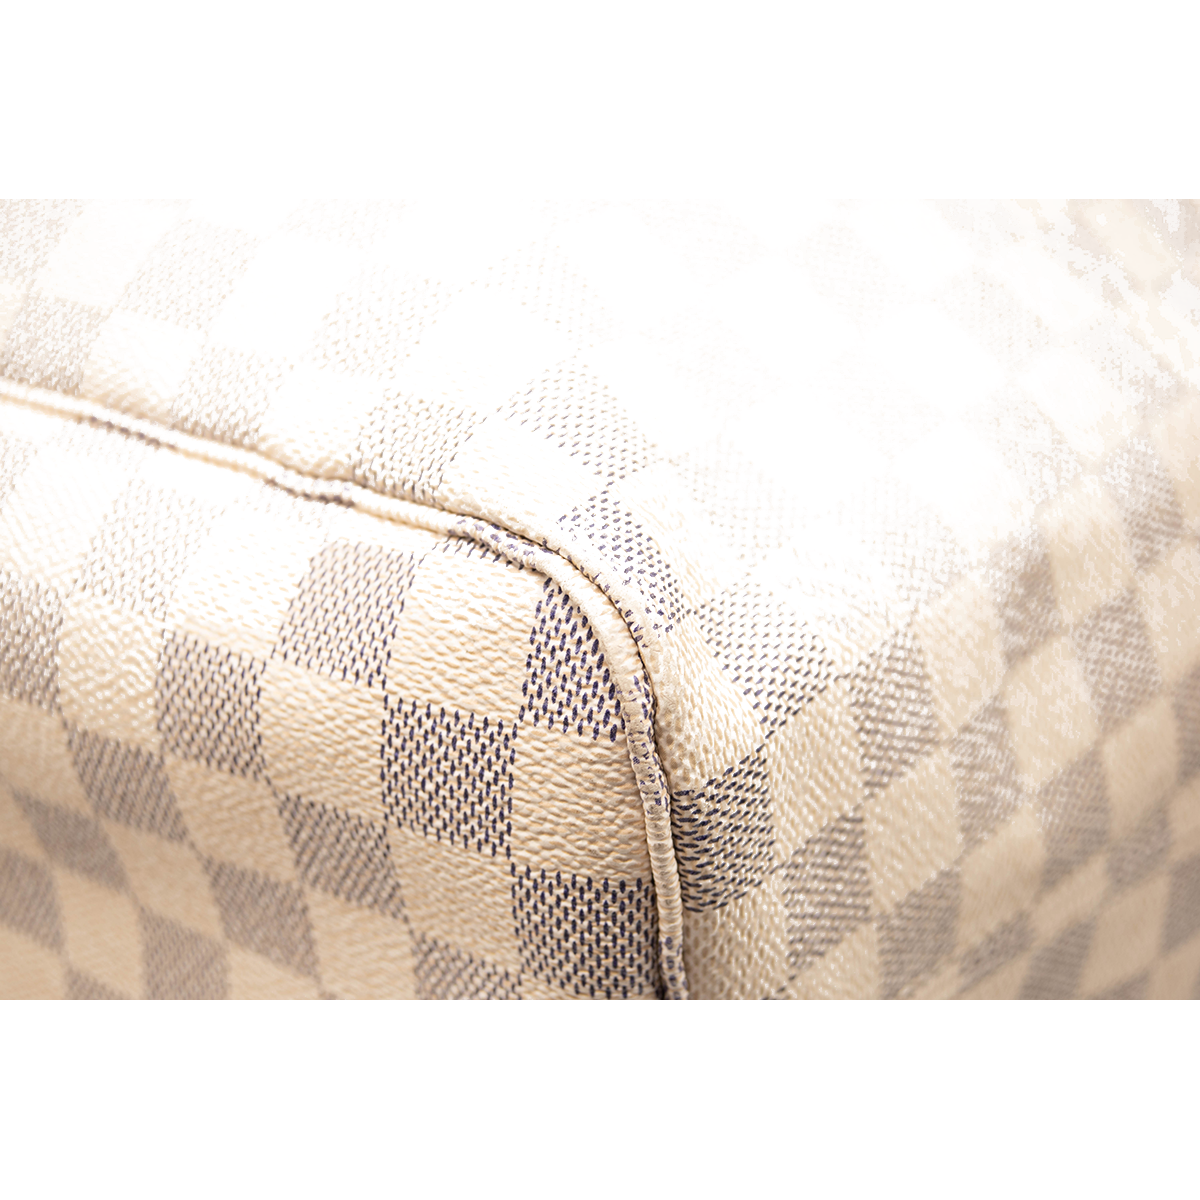 Louis Vuitton Damier Azur Hampstead Tote Bag color white used from japan  TES20